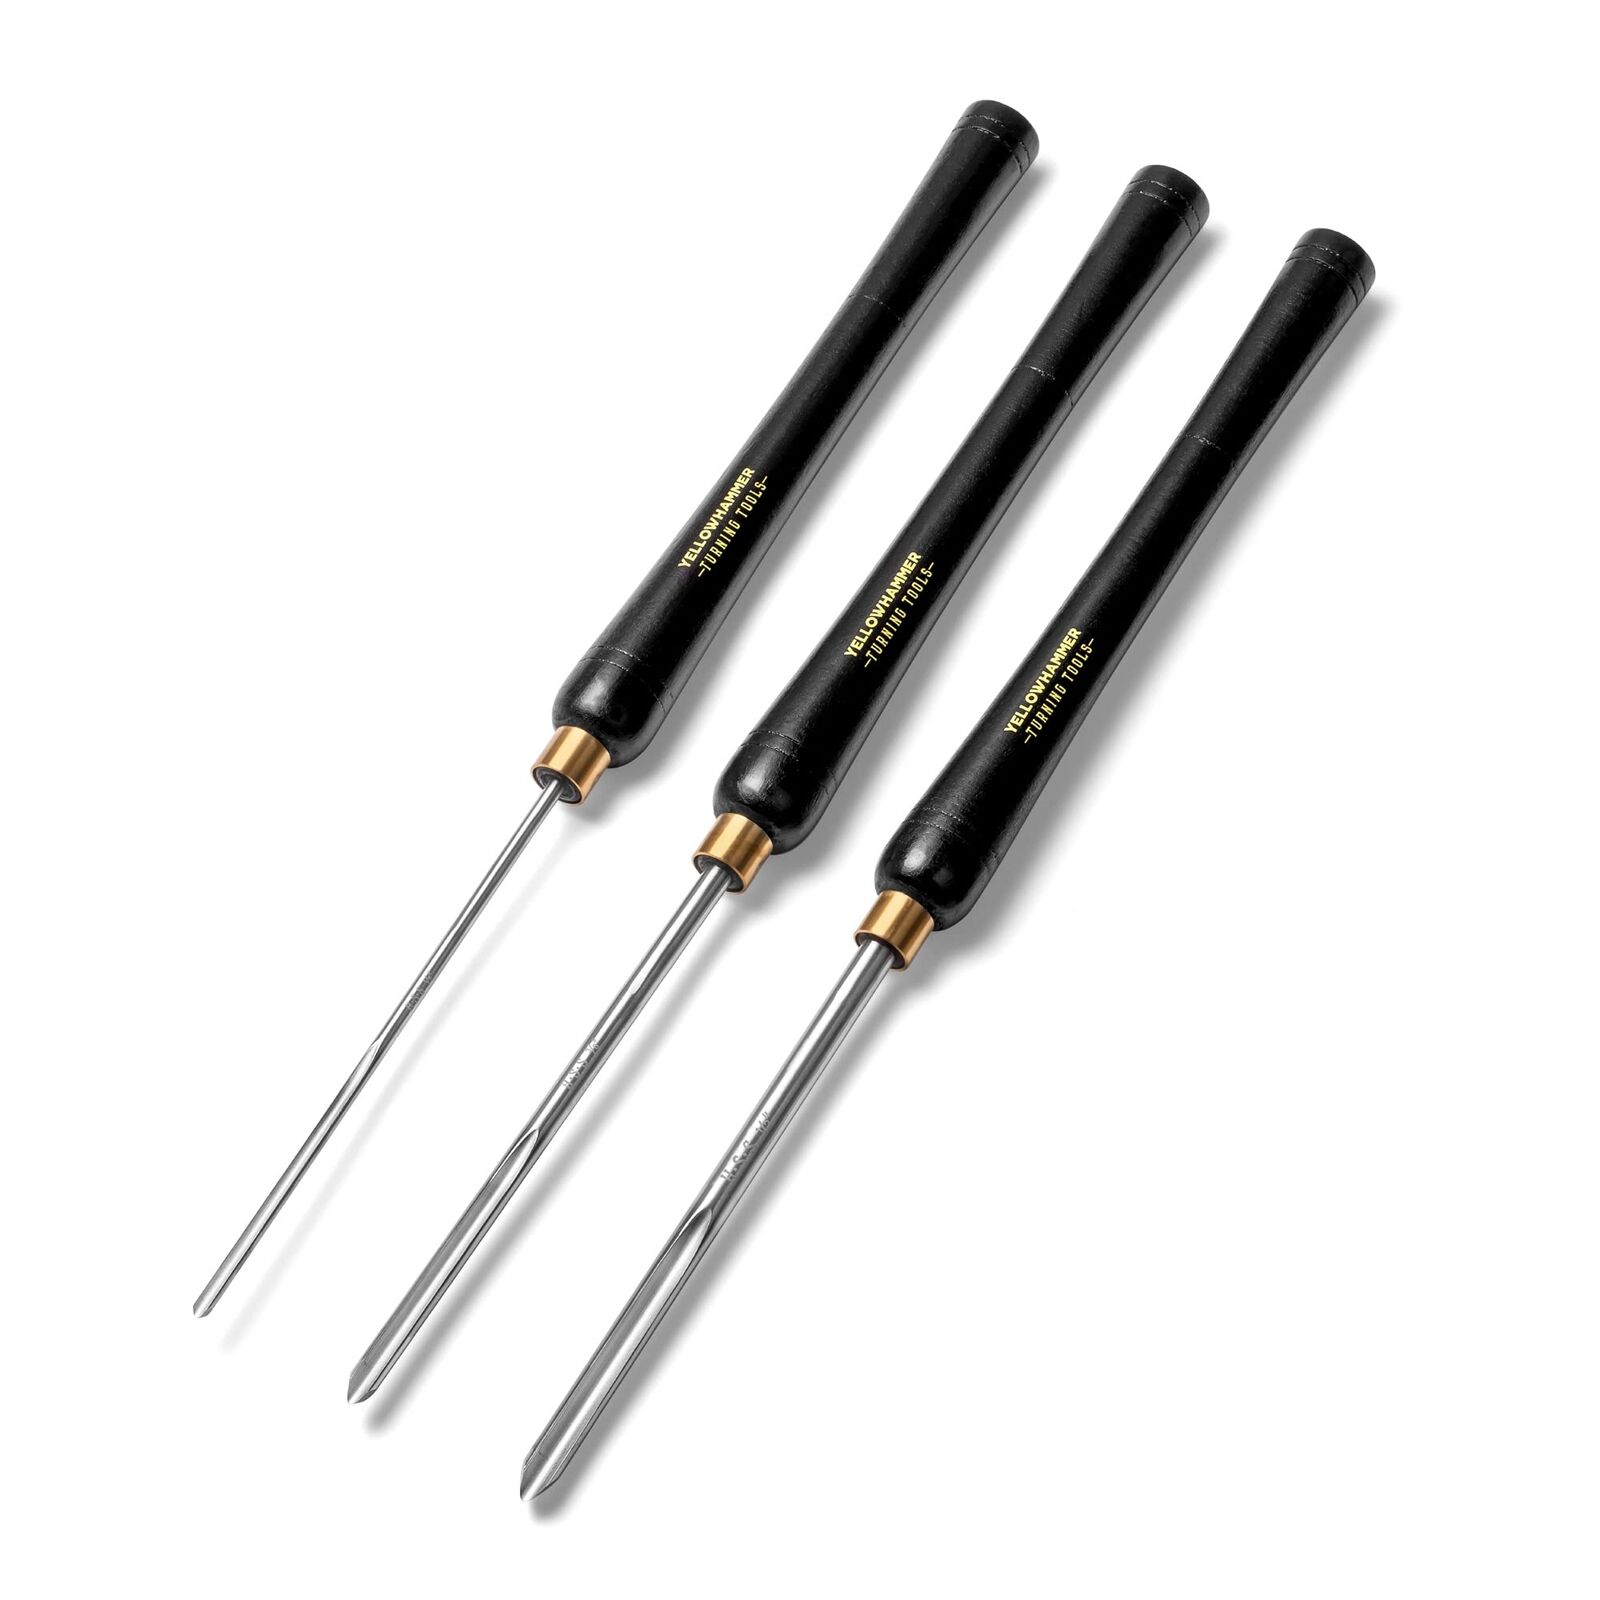 Yellowhammer Turning Tools Essentials 3 Piece Bowl Gouge Set